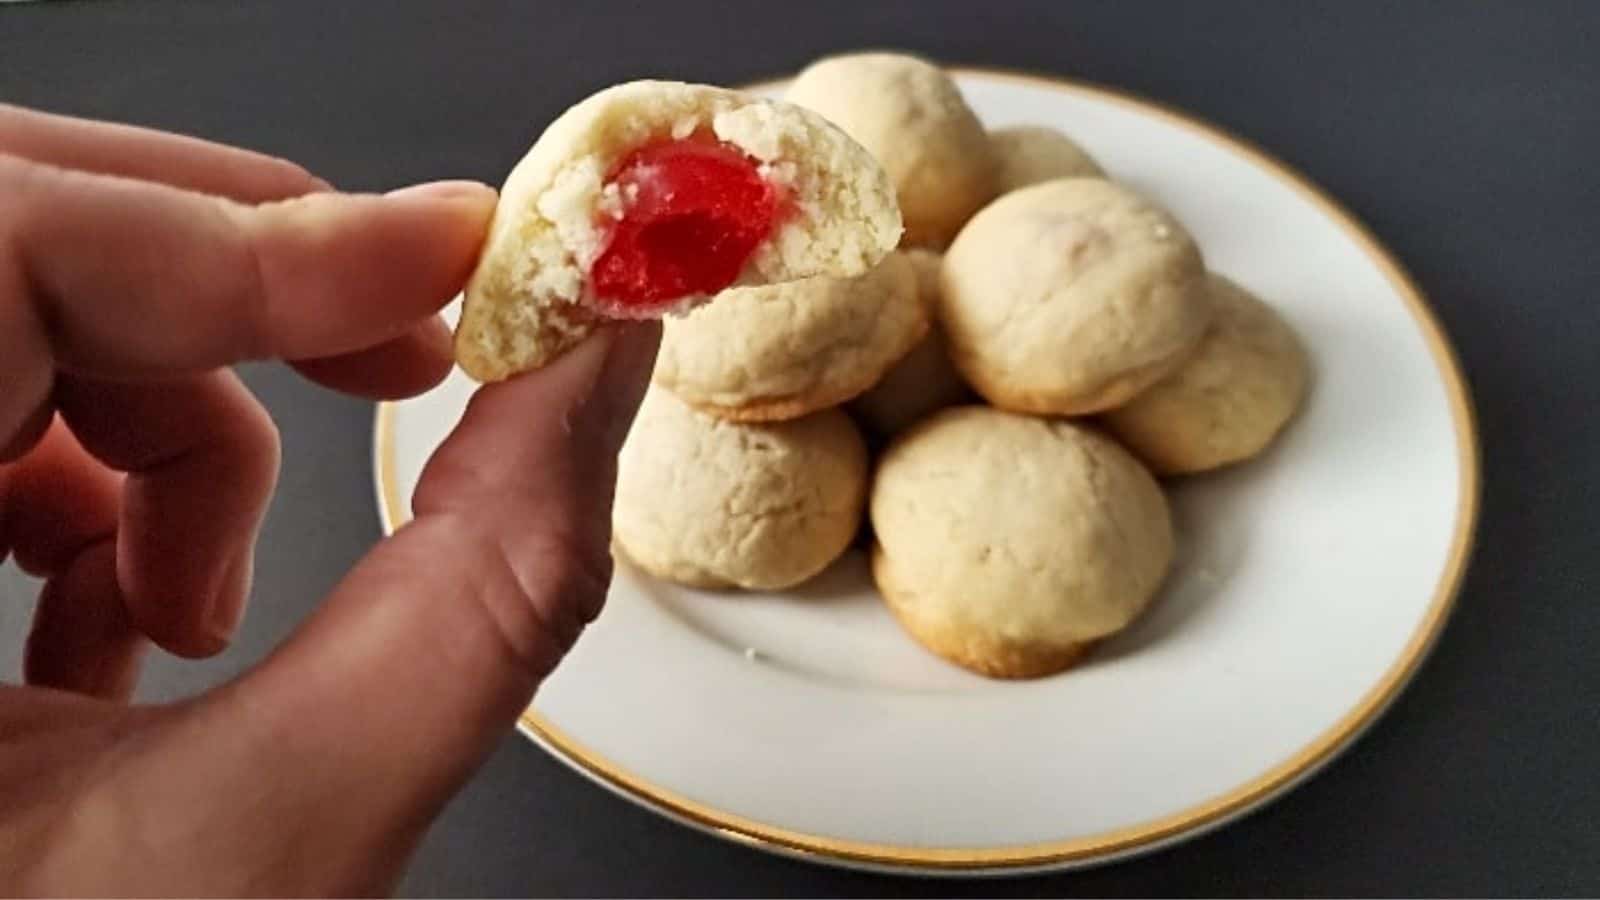 Image shows a hand holding a Cherry Surprise Cookie with more on a white plate behind it.